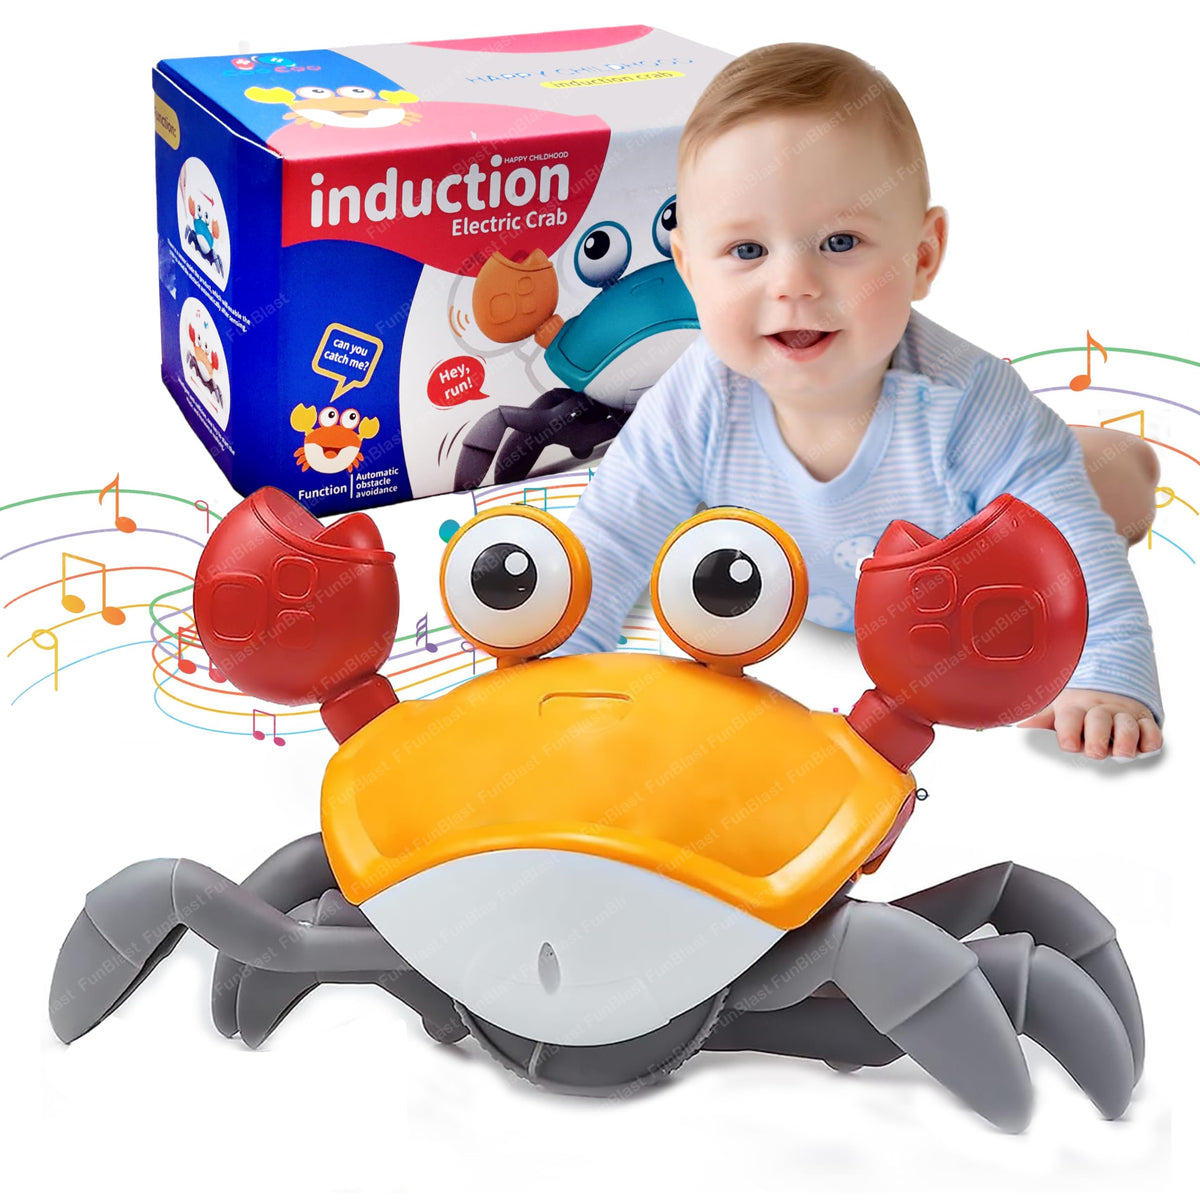 FunBlast Crawling Crab Toy for Kids - Dancing Crawling Baby Toys, Electronic Walking Moving Toys for Babies Infant Toddlers Fun Play Interactive Early Learning Educational Toys (Random Color)